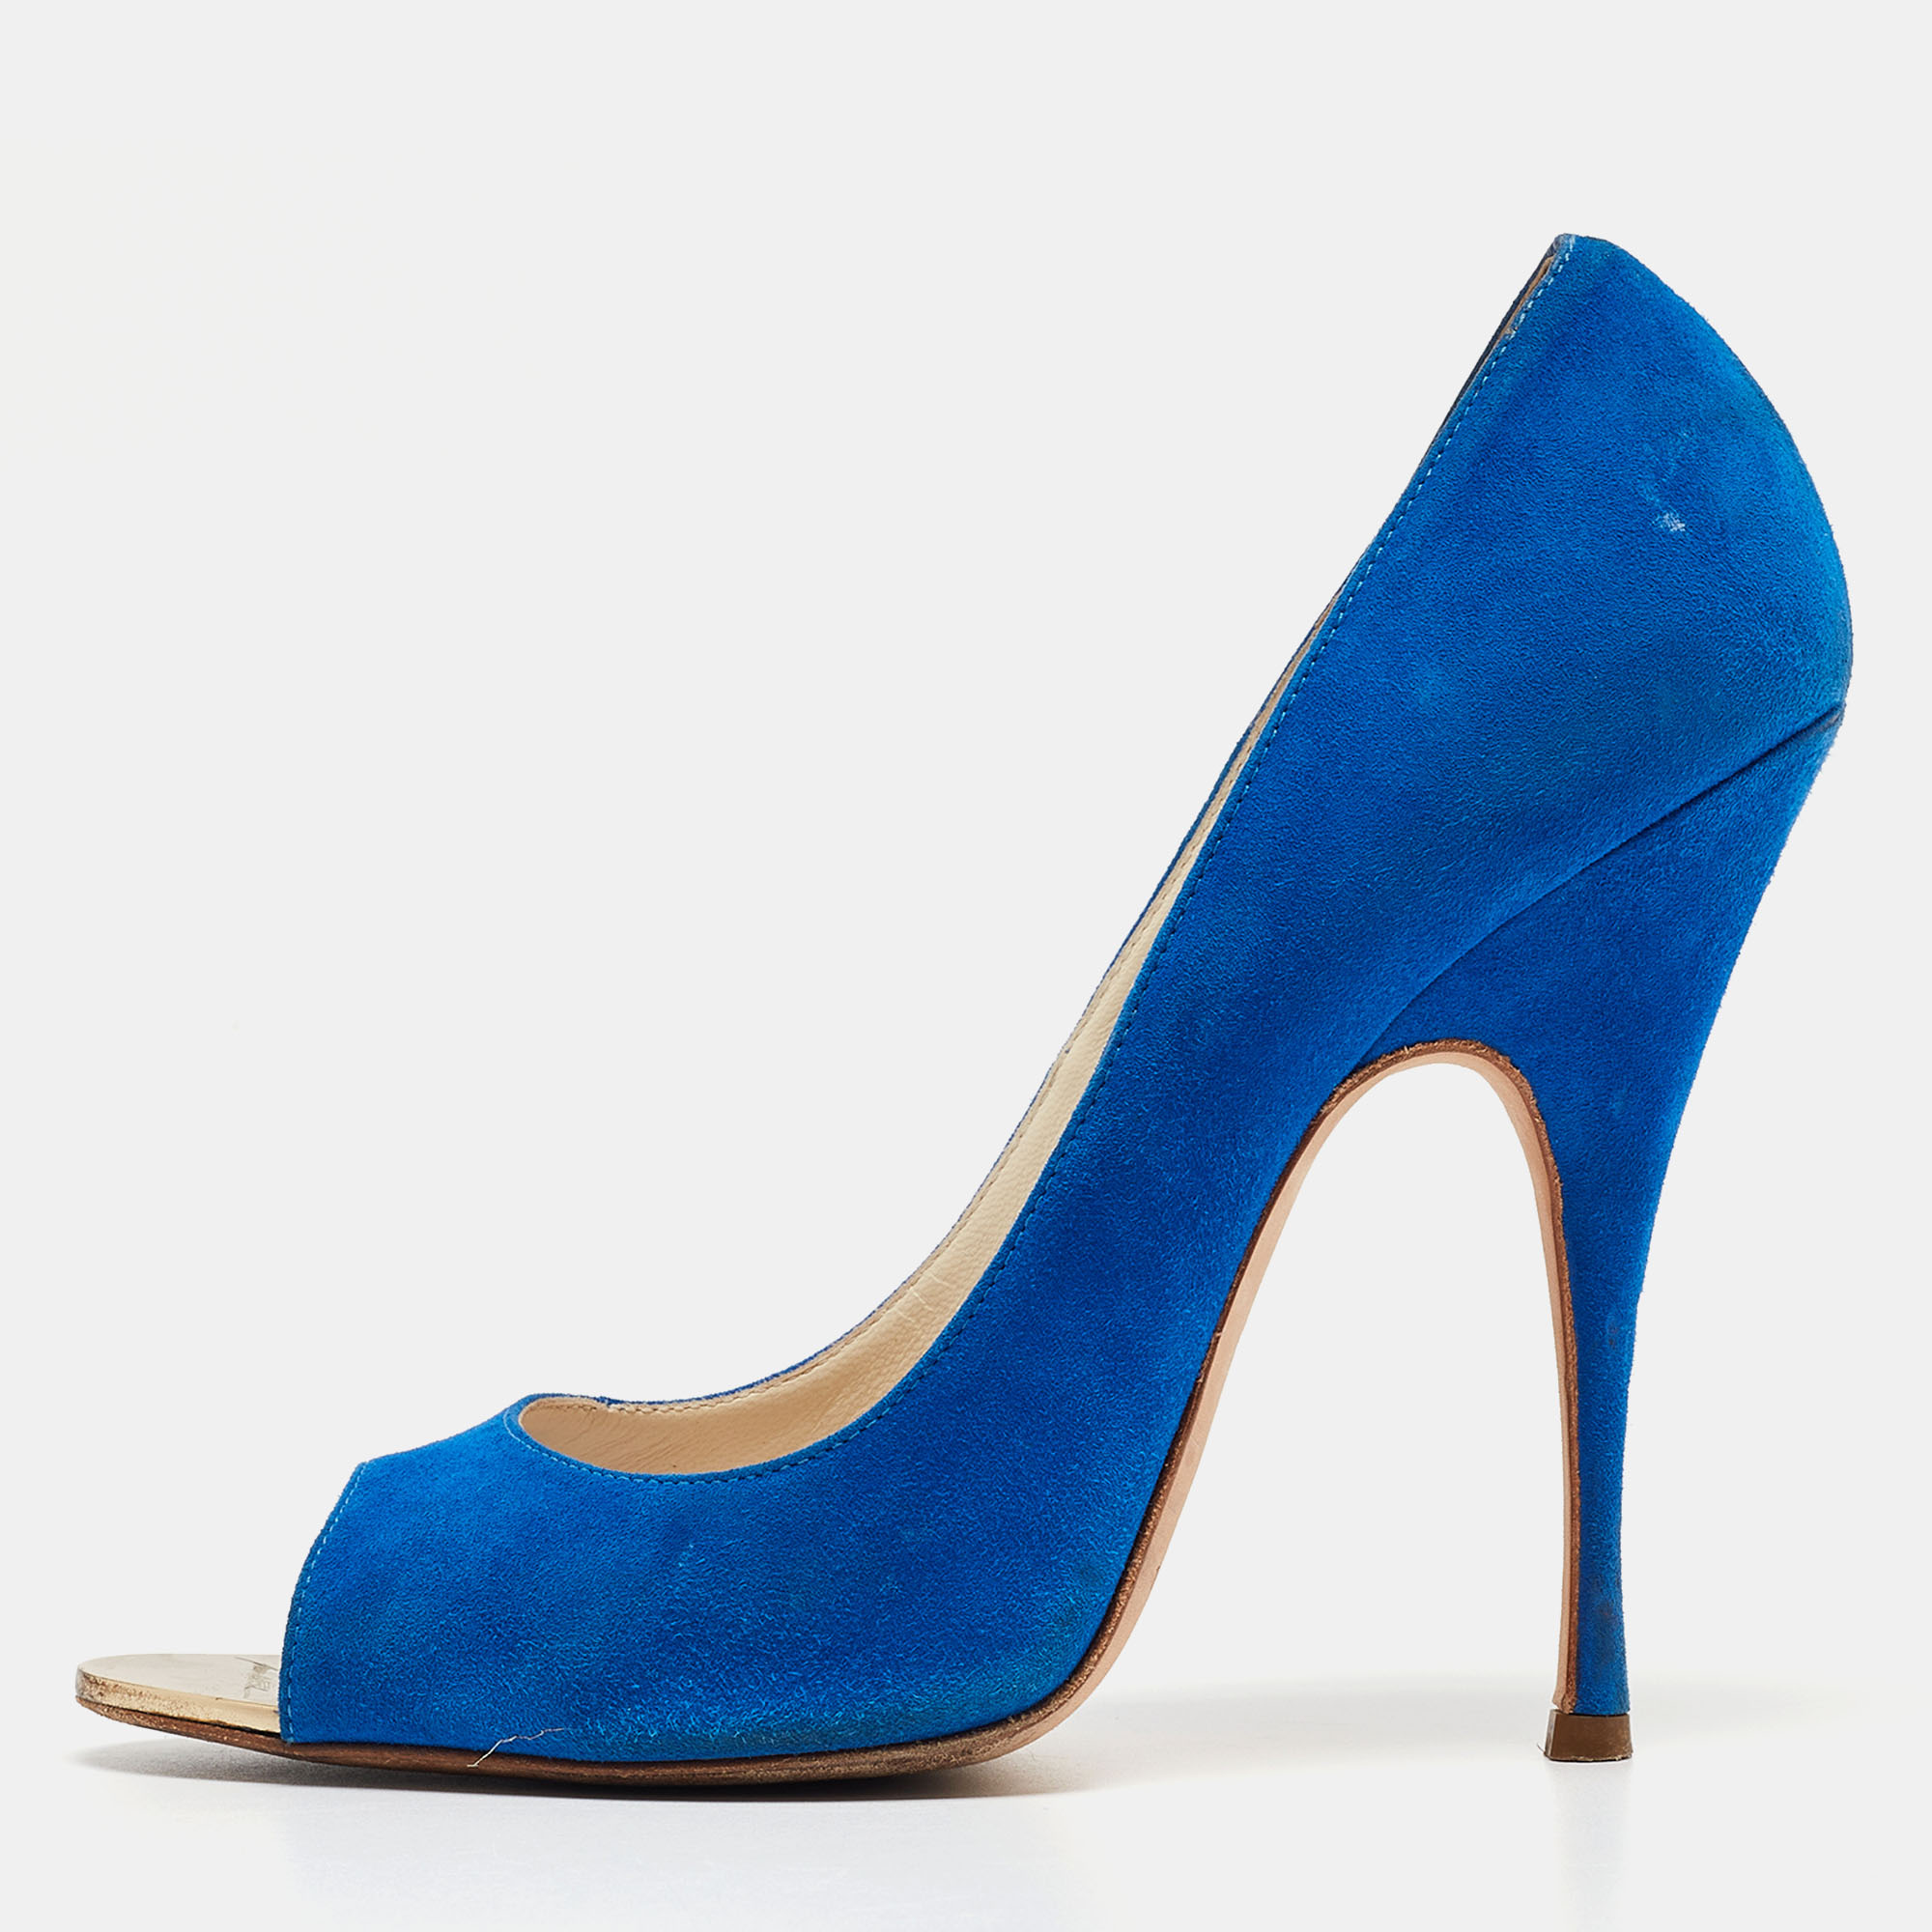 Pre-owned Brian Atwood Royal Blue Suede Open-toe Pumps Size 38.5